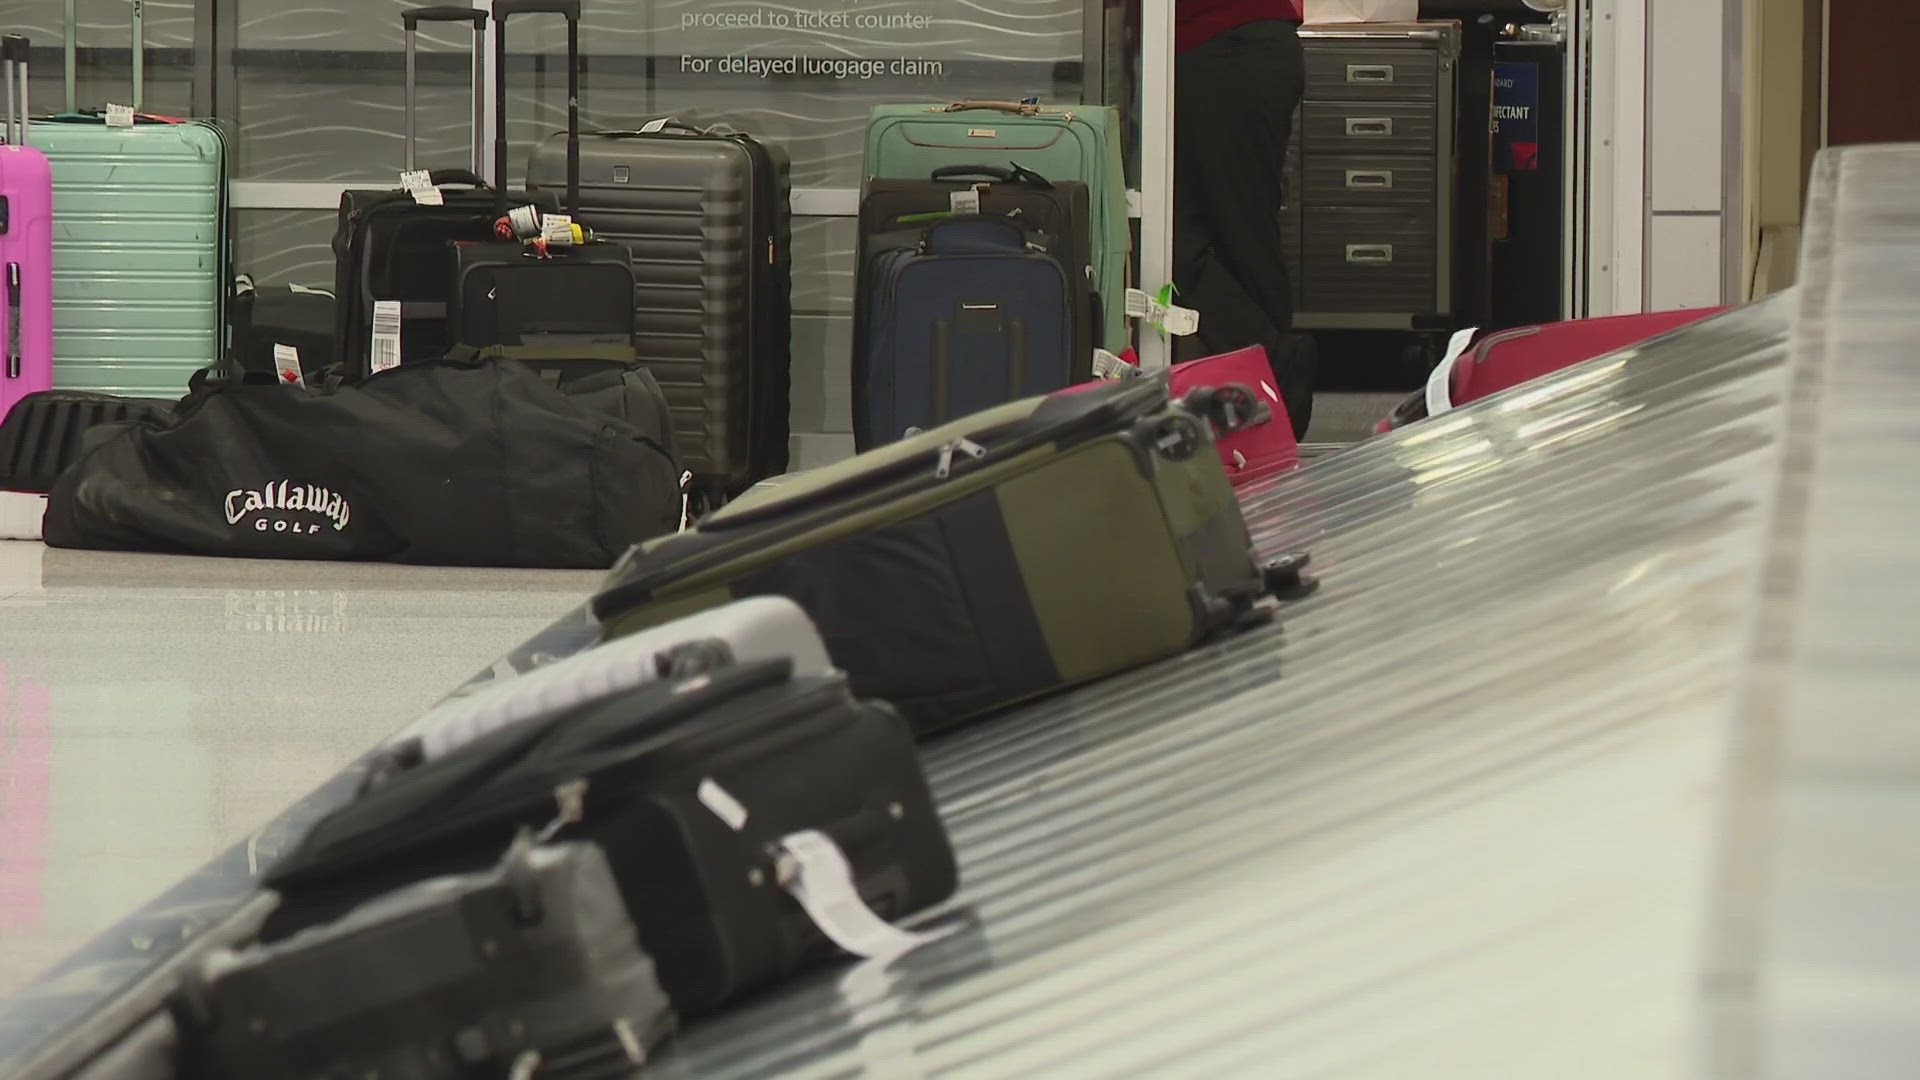 The investigation involved bags on two flights that originated in San Francisco.